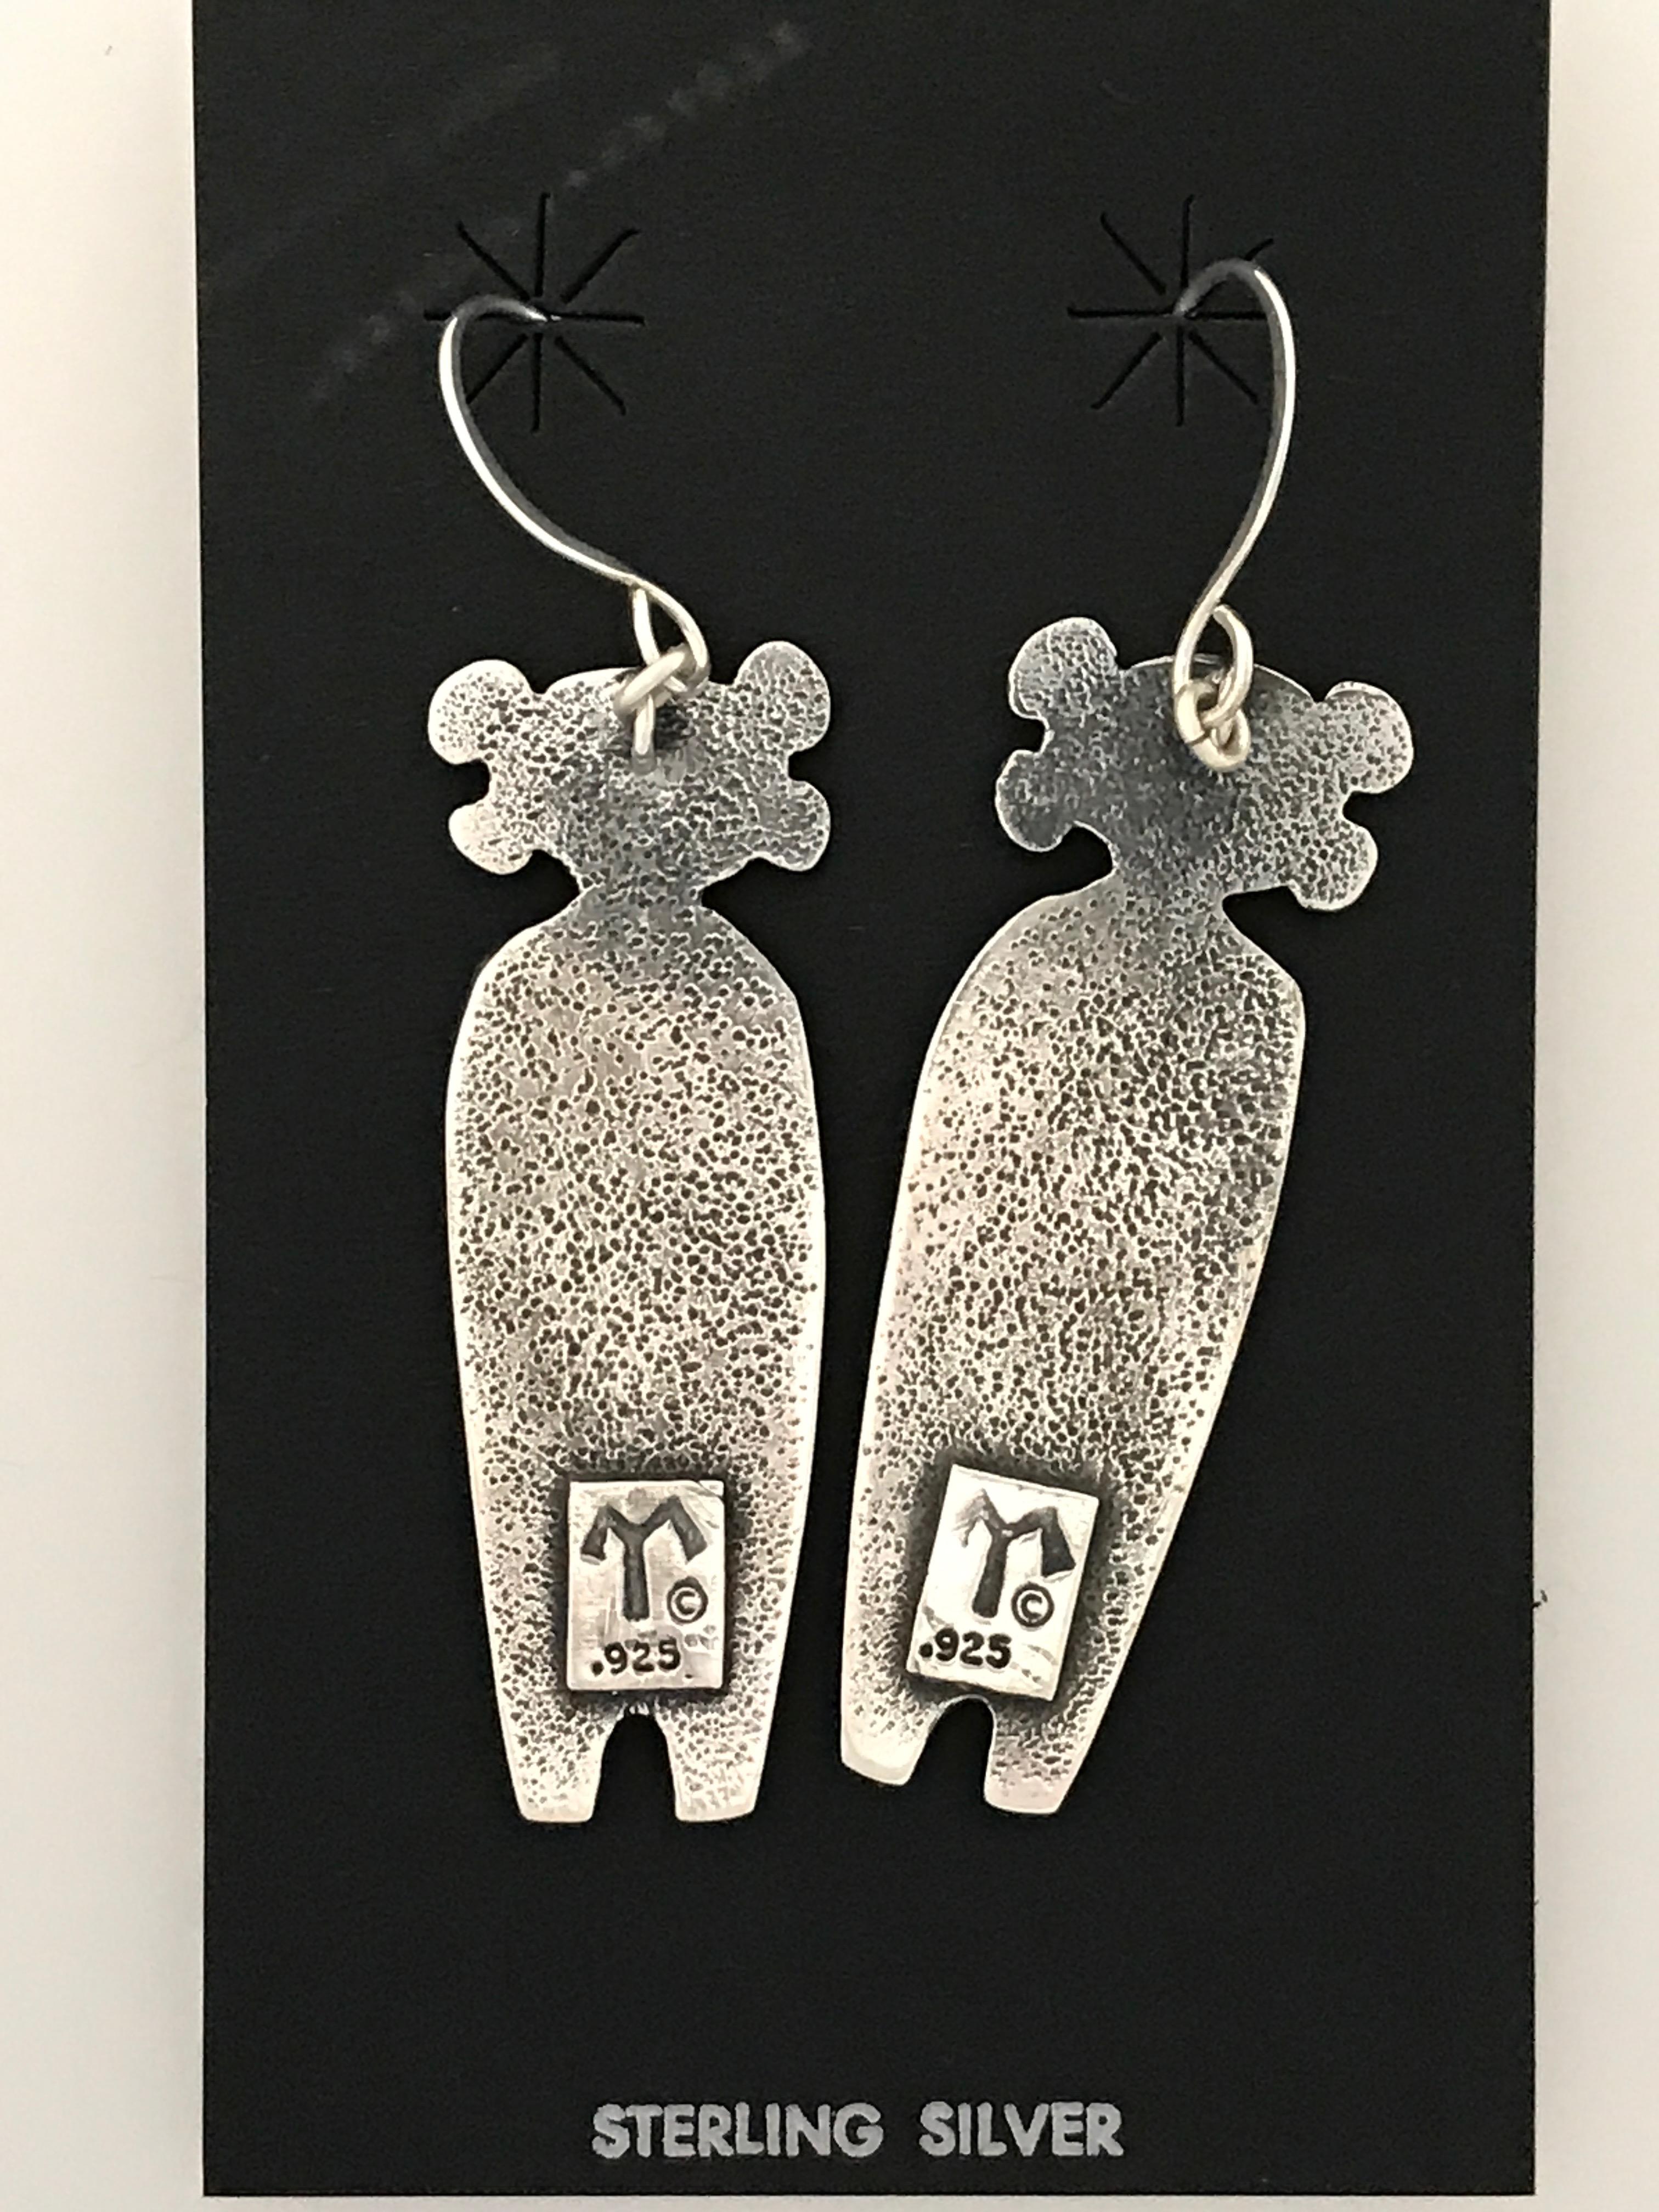 Twins Standing Guard, cast silver earrings Melanie Yazzie Navajo Hopi

Melanie A. Yazzie (Navajo-Diné) is a highly regarded multimedia artist known for her printmaking, paintings, sculpture, and jewelry designs.  

She has exhibited, lectured, and